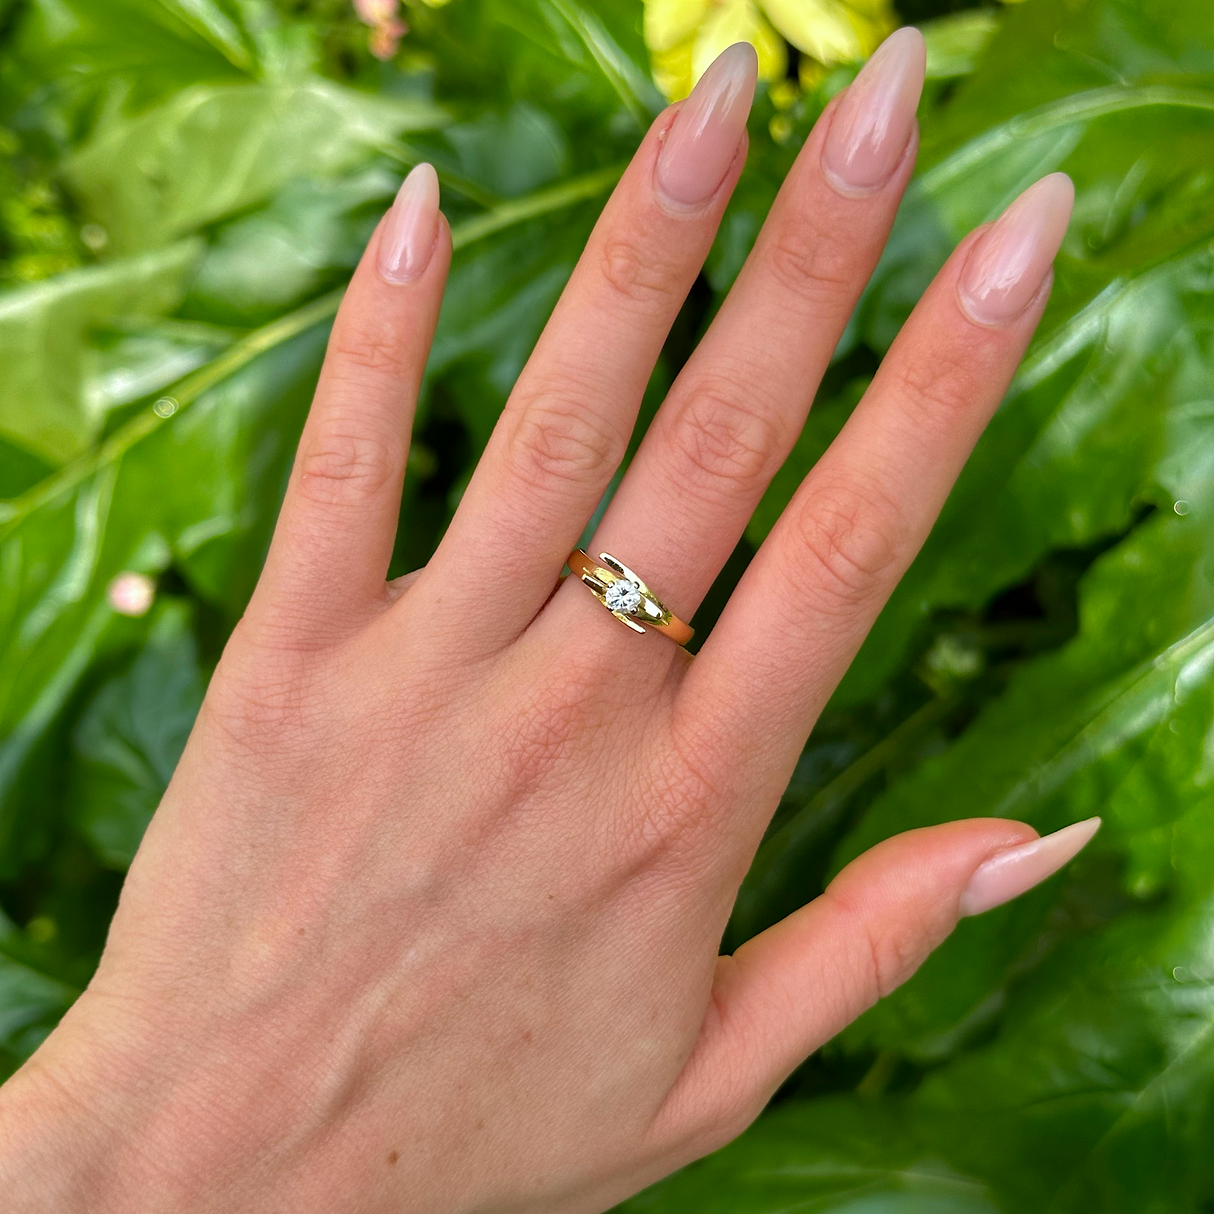 Vintage, Unique 1970s Diamond Engagement Ring, 18ct Yellow Gold worn on hand.